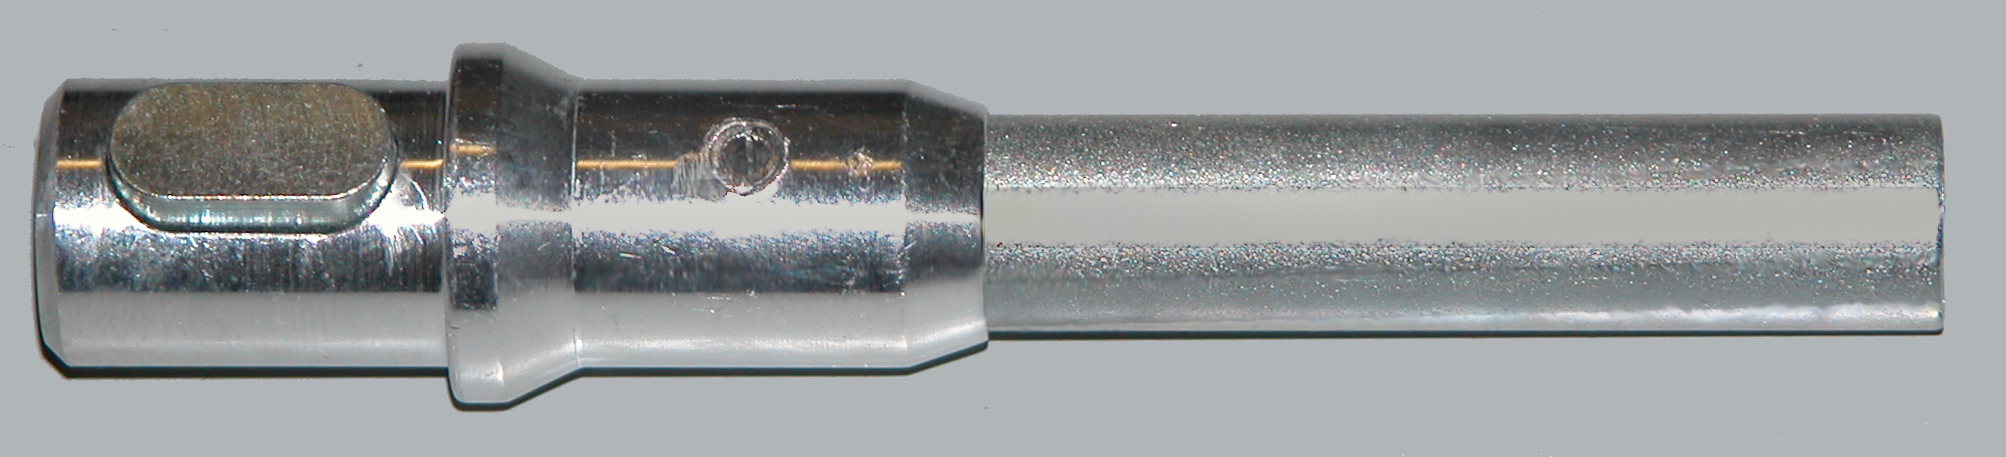 2715 Drill Adapter, small ButtonLok for top down or bottom up use